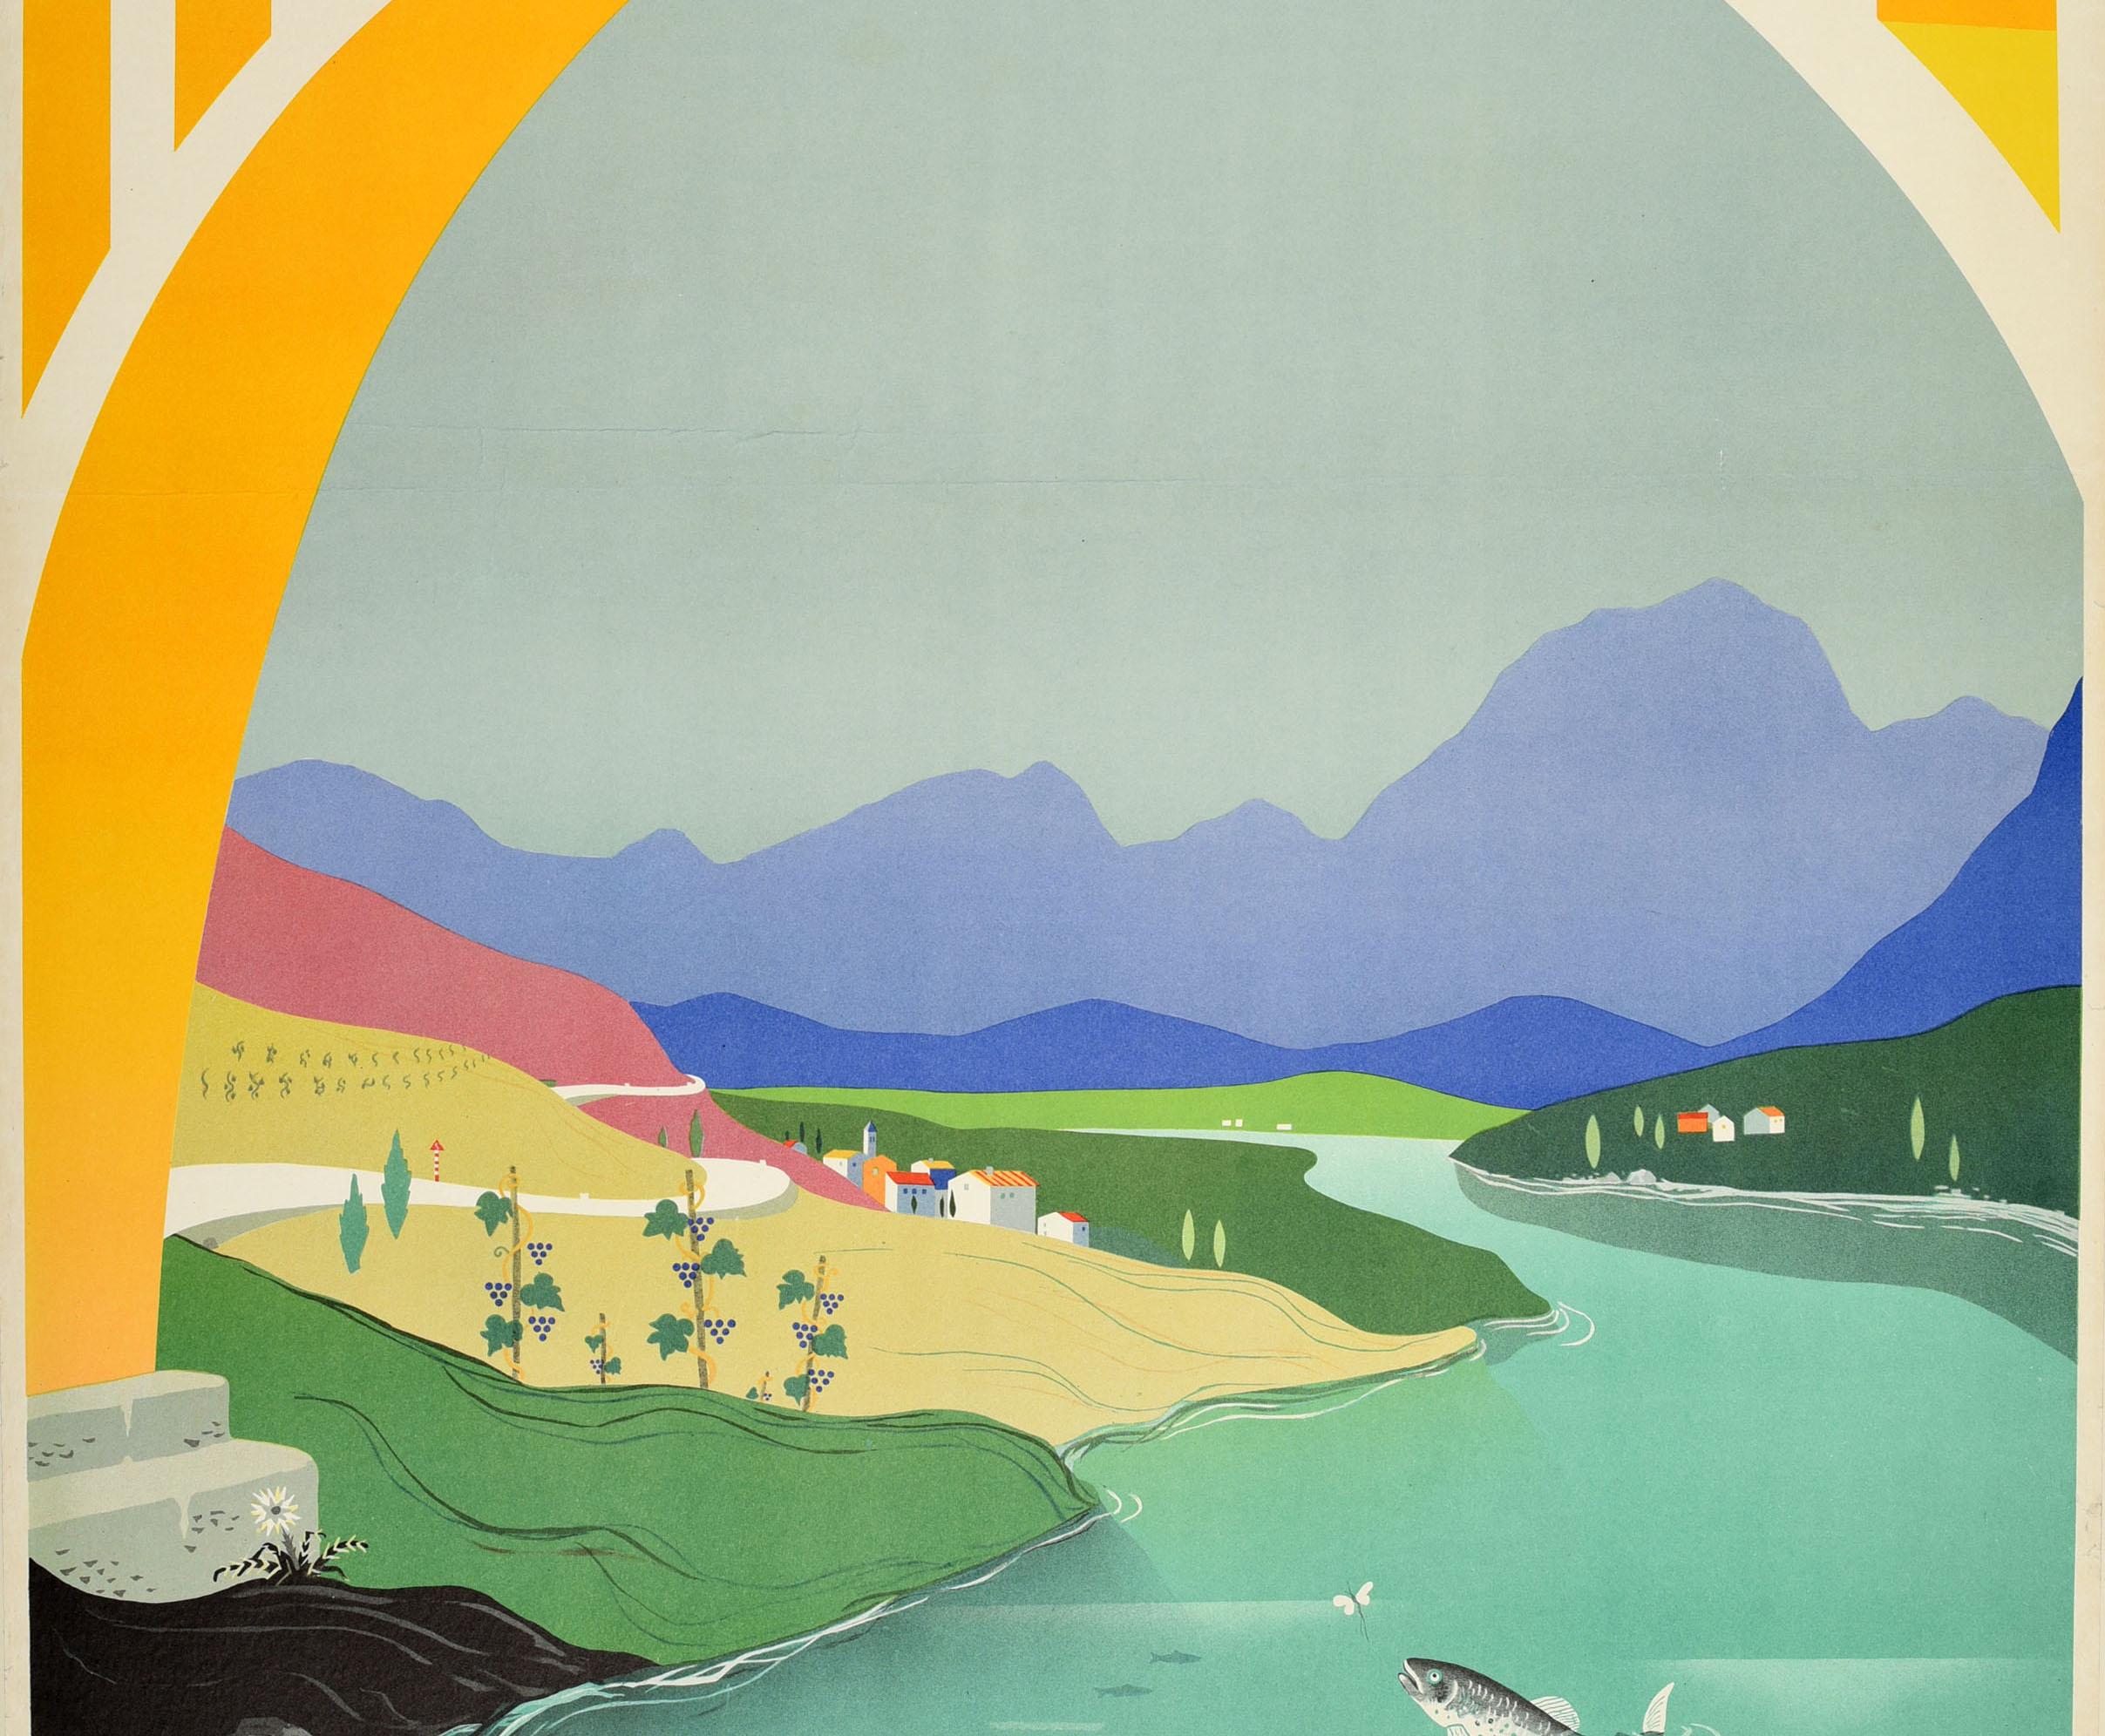 Original vintage travel advertising poster published by the Slovenian Tourism Association to promote the region of Slovenia in (the former) Yugoslavia - Slovenija Yugoslavija. Scenic river view featuring a tall railway bridge arch with a train